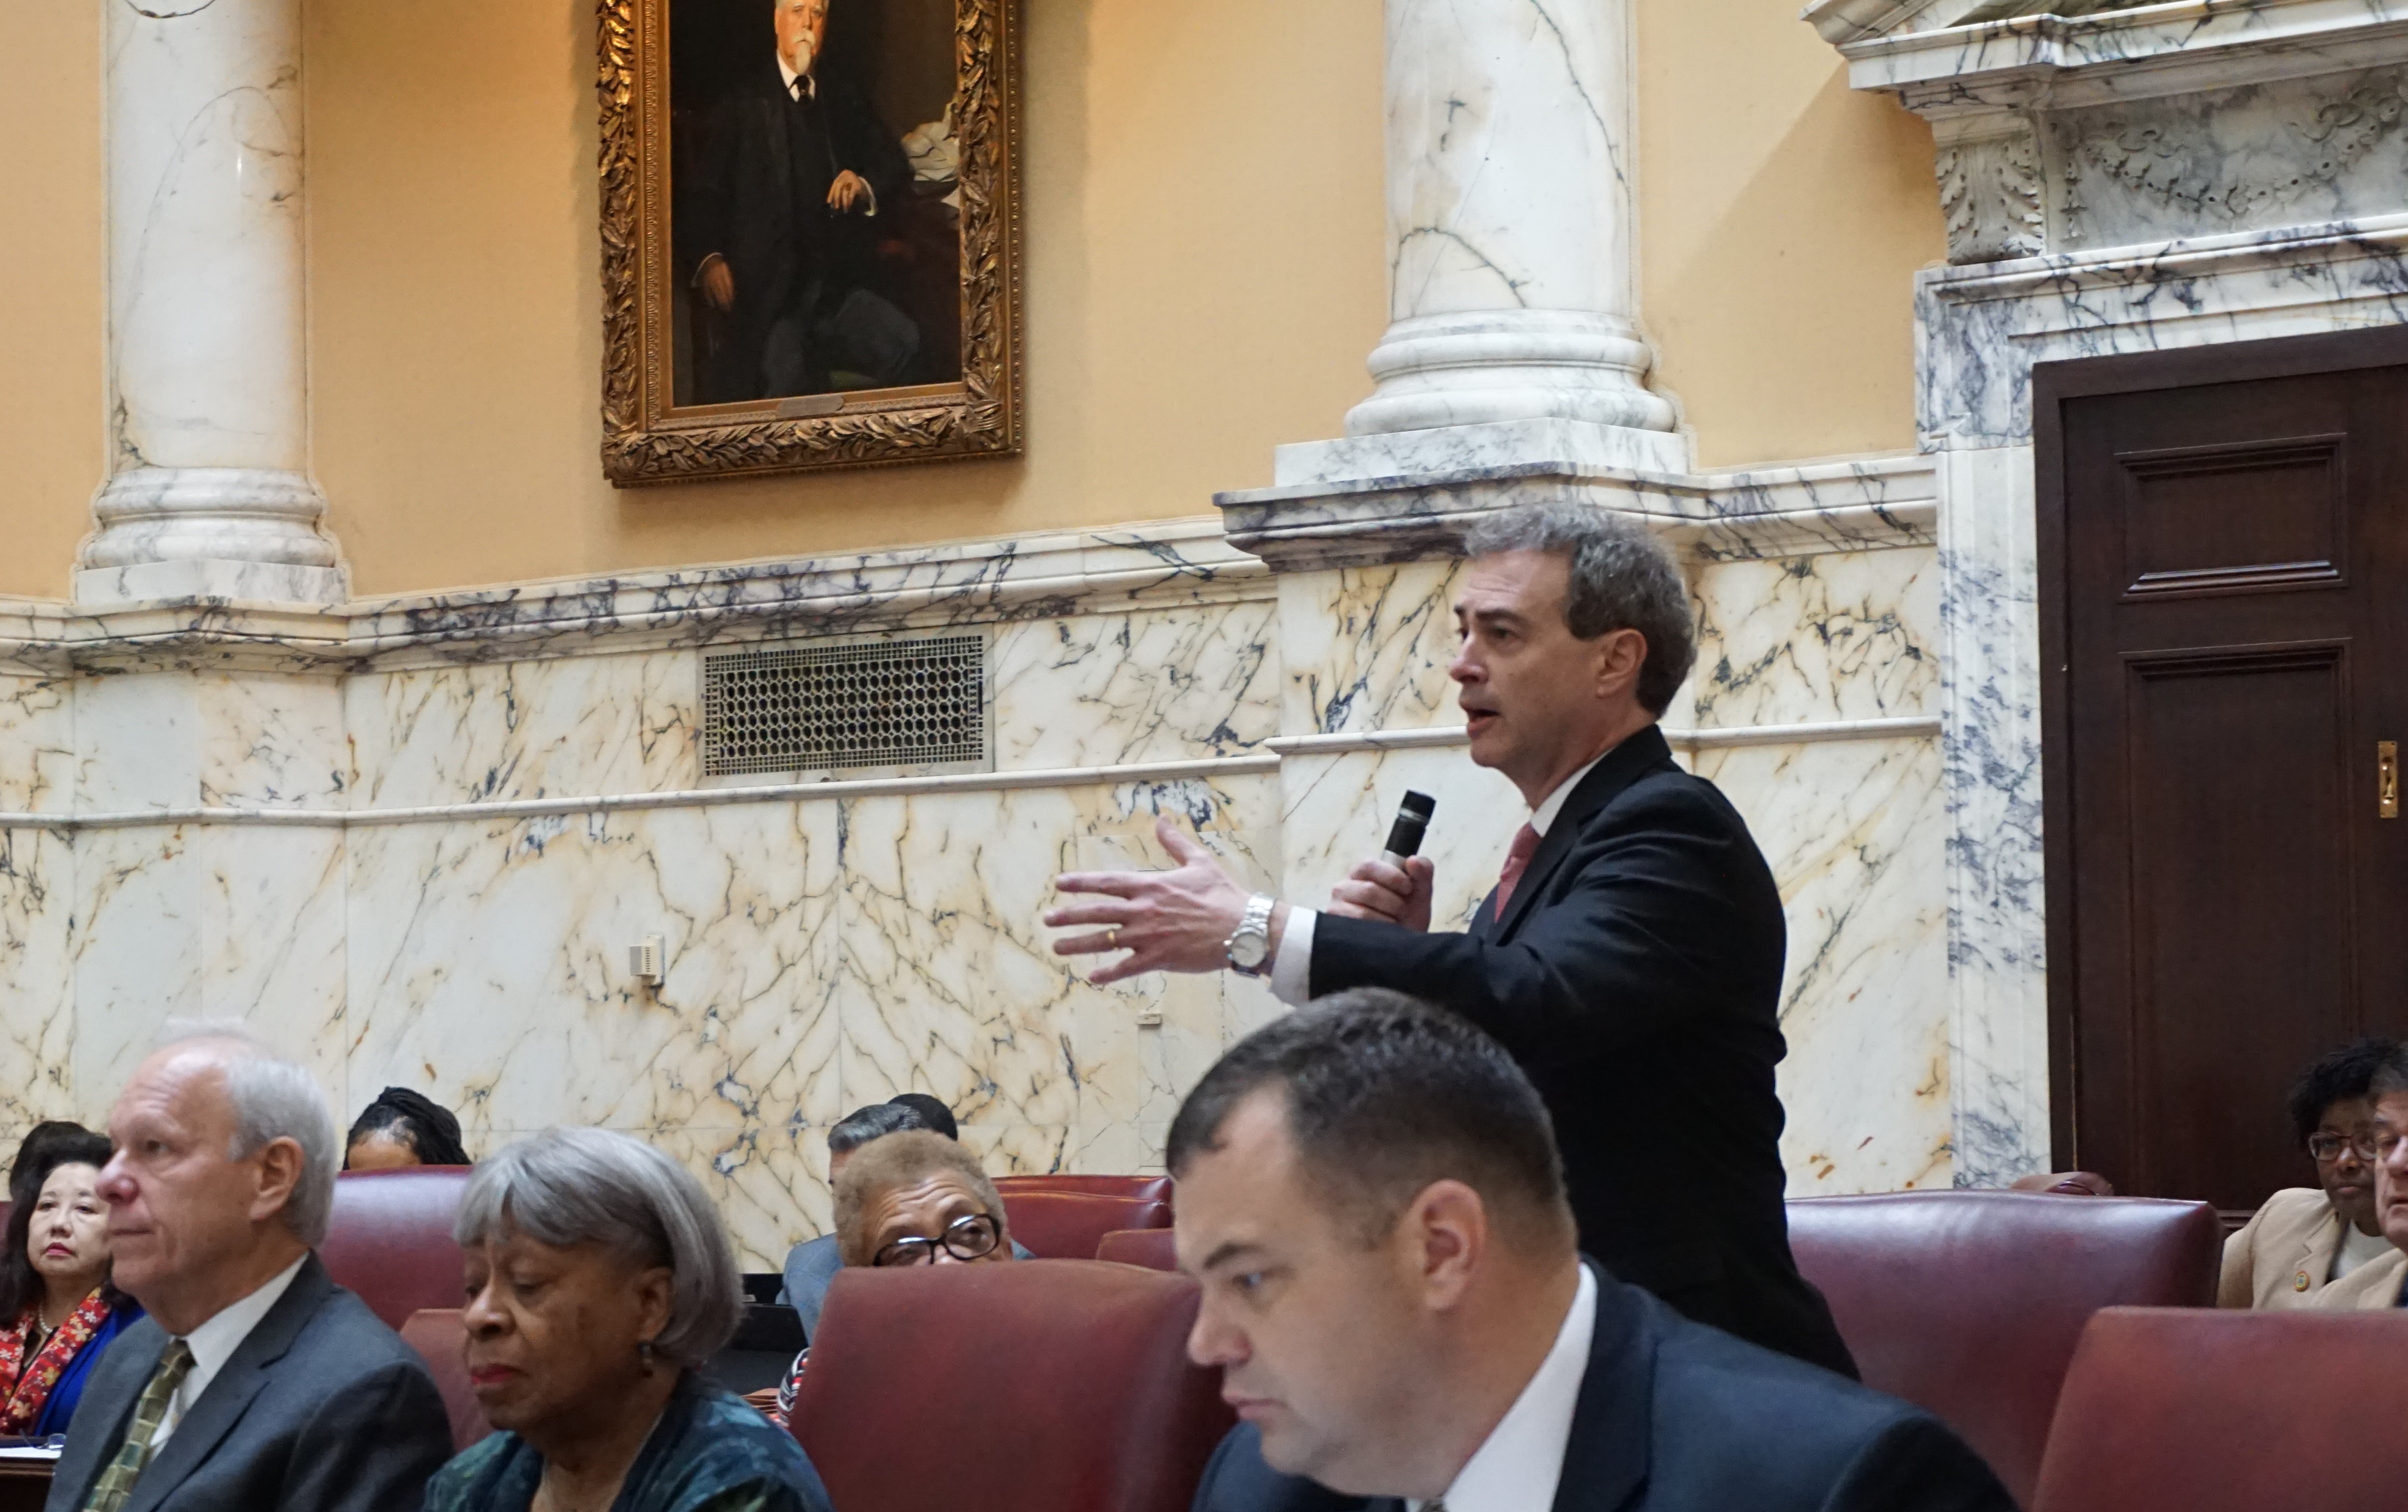 Sen. Brian Feldman, D-Montgomery, is the primary sponsor of Senate bill 705. This bill would ensure unpaid leave for live organ donors and protections from insurance companies.